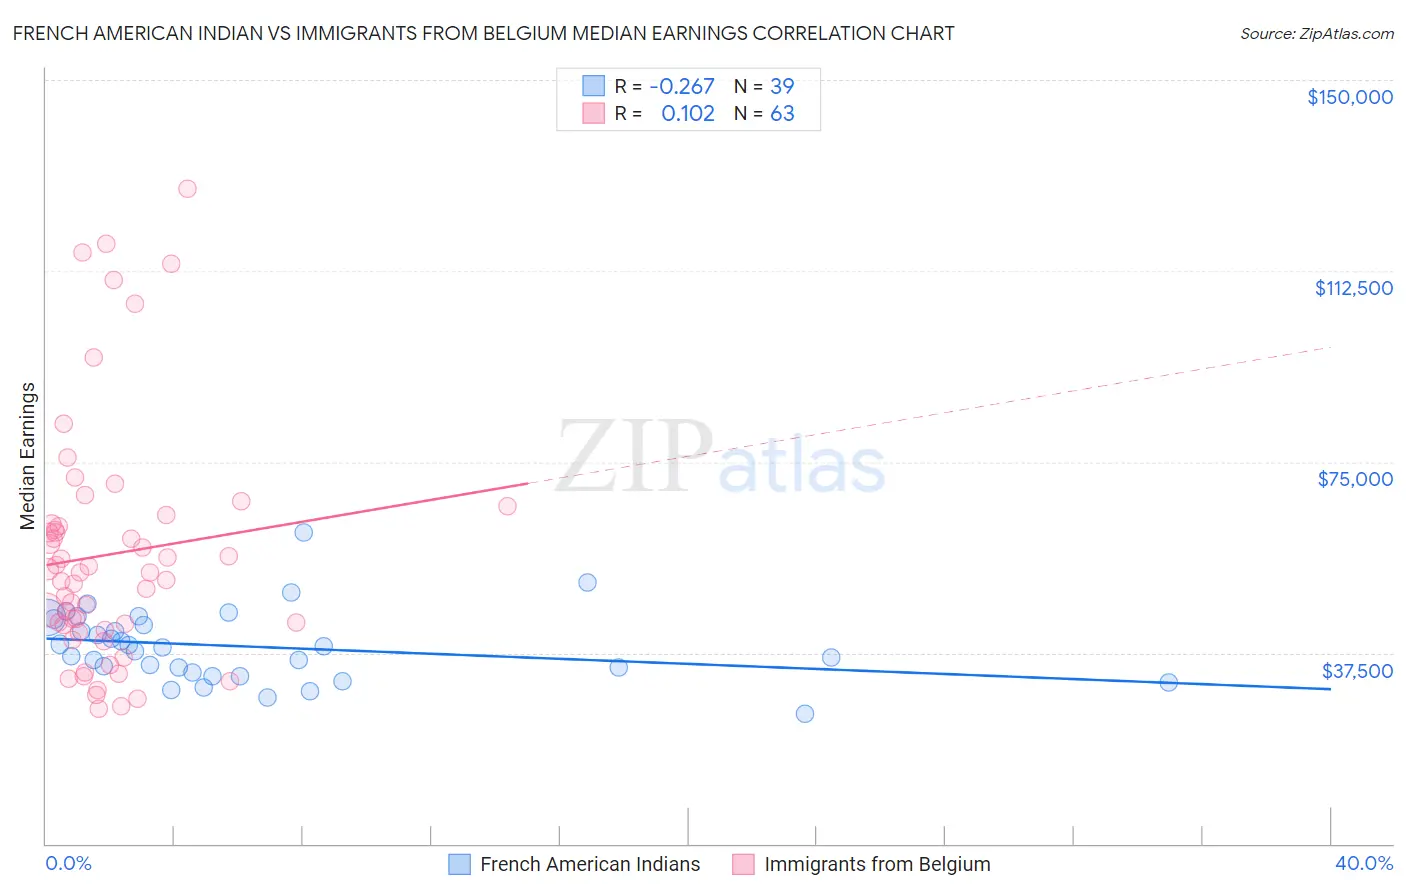 French American Indian vs Immigrants from Belgium Median Earnings